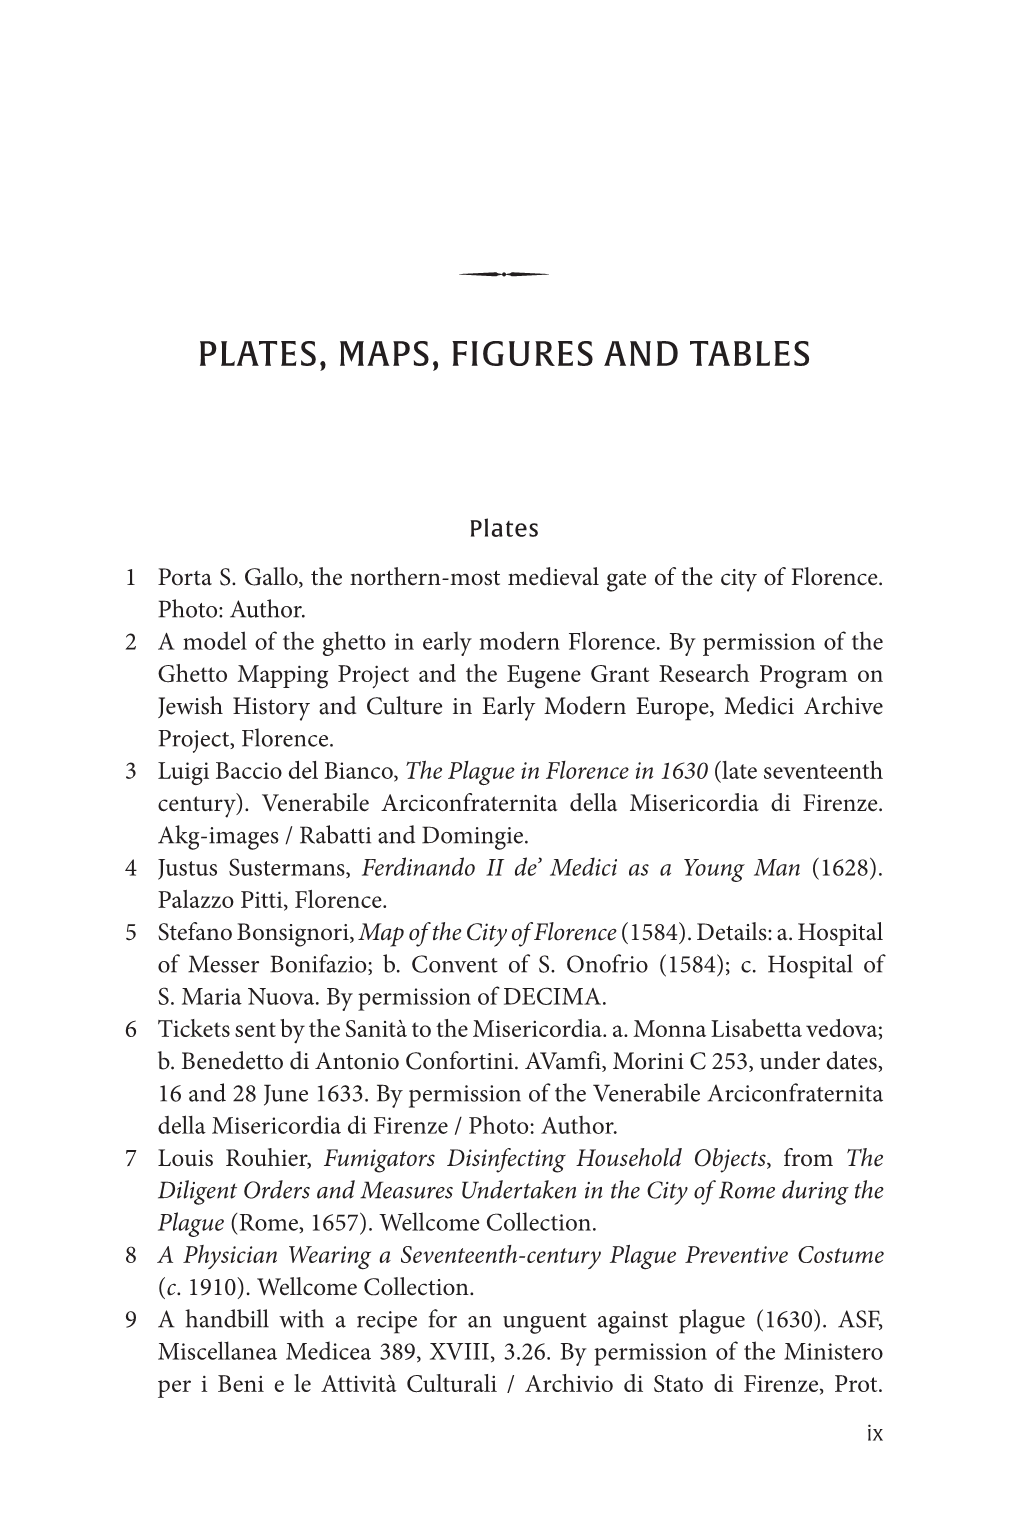 Plates, Maps, Figures and Tables